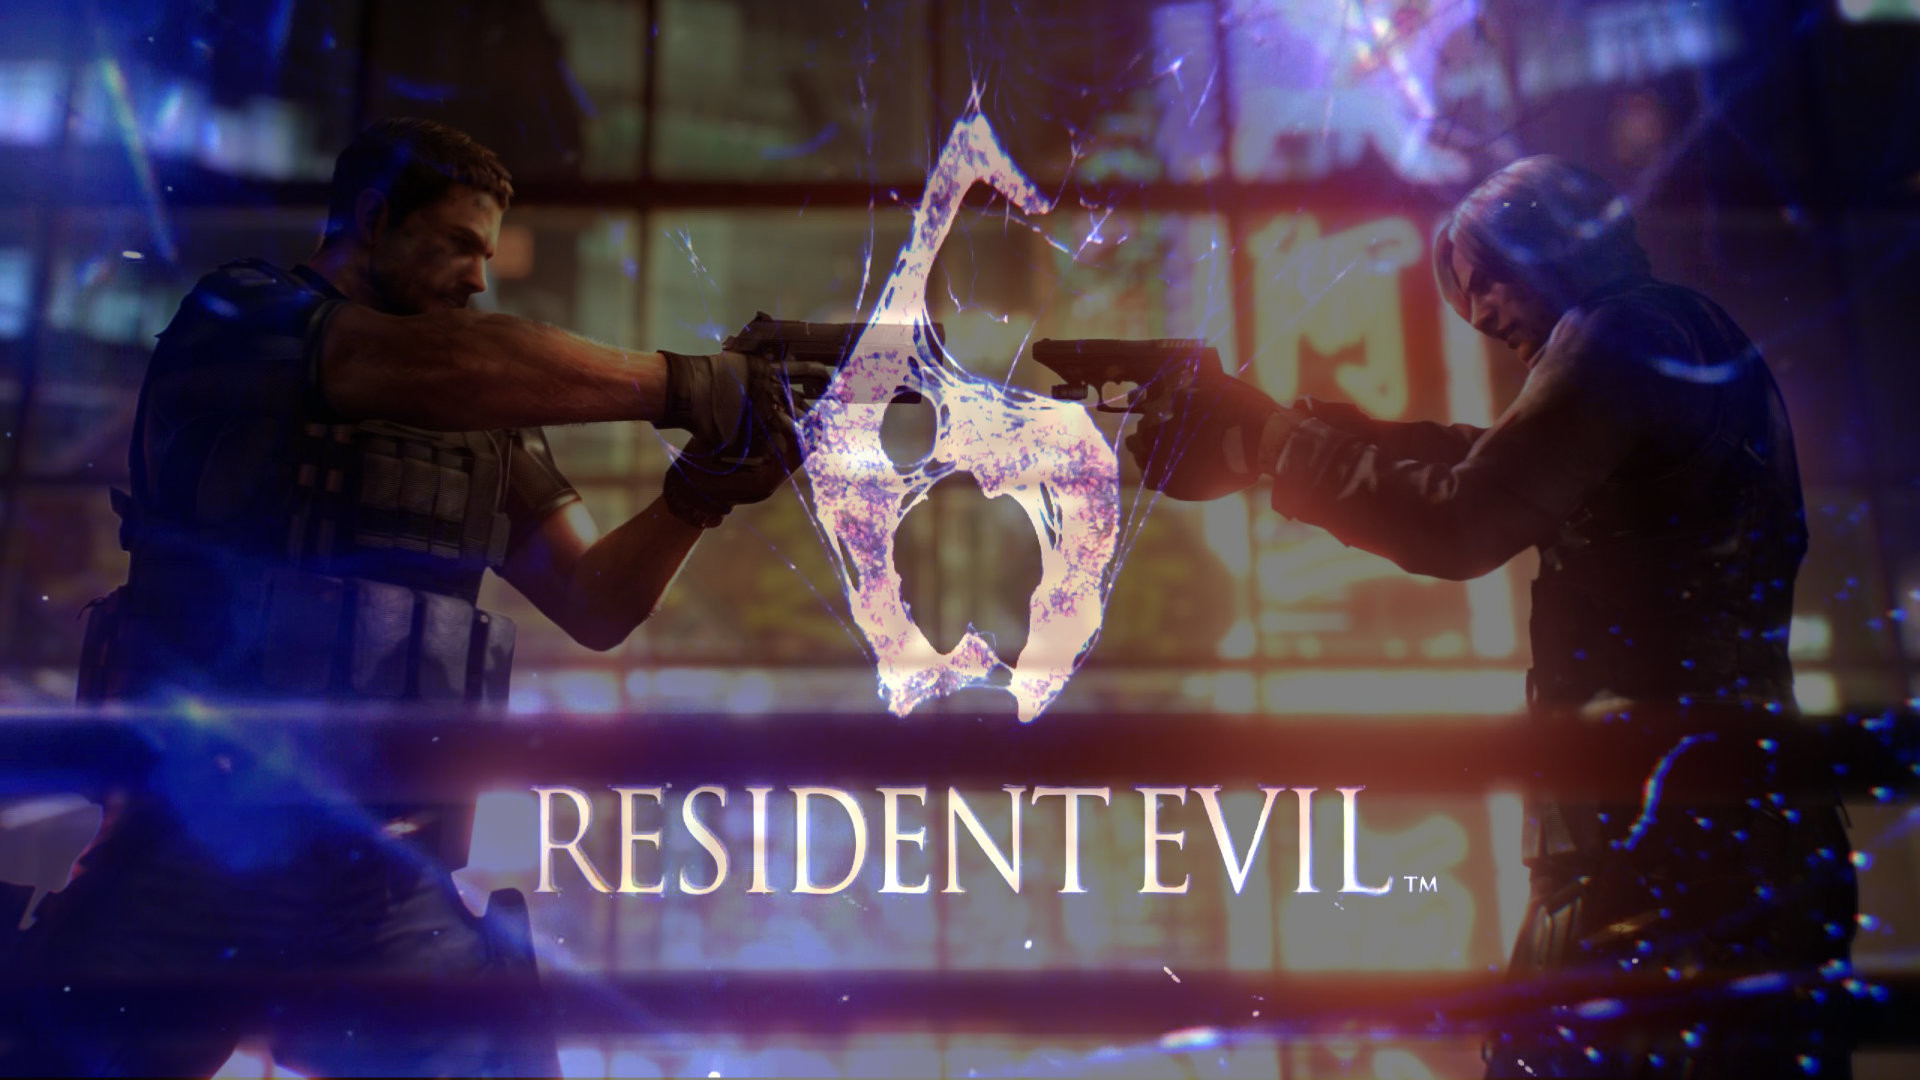 Lightning Returns Final Fantasy XIII images RESIDENT EVIL 6 HD wallpaper  and background photos